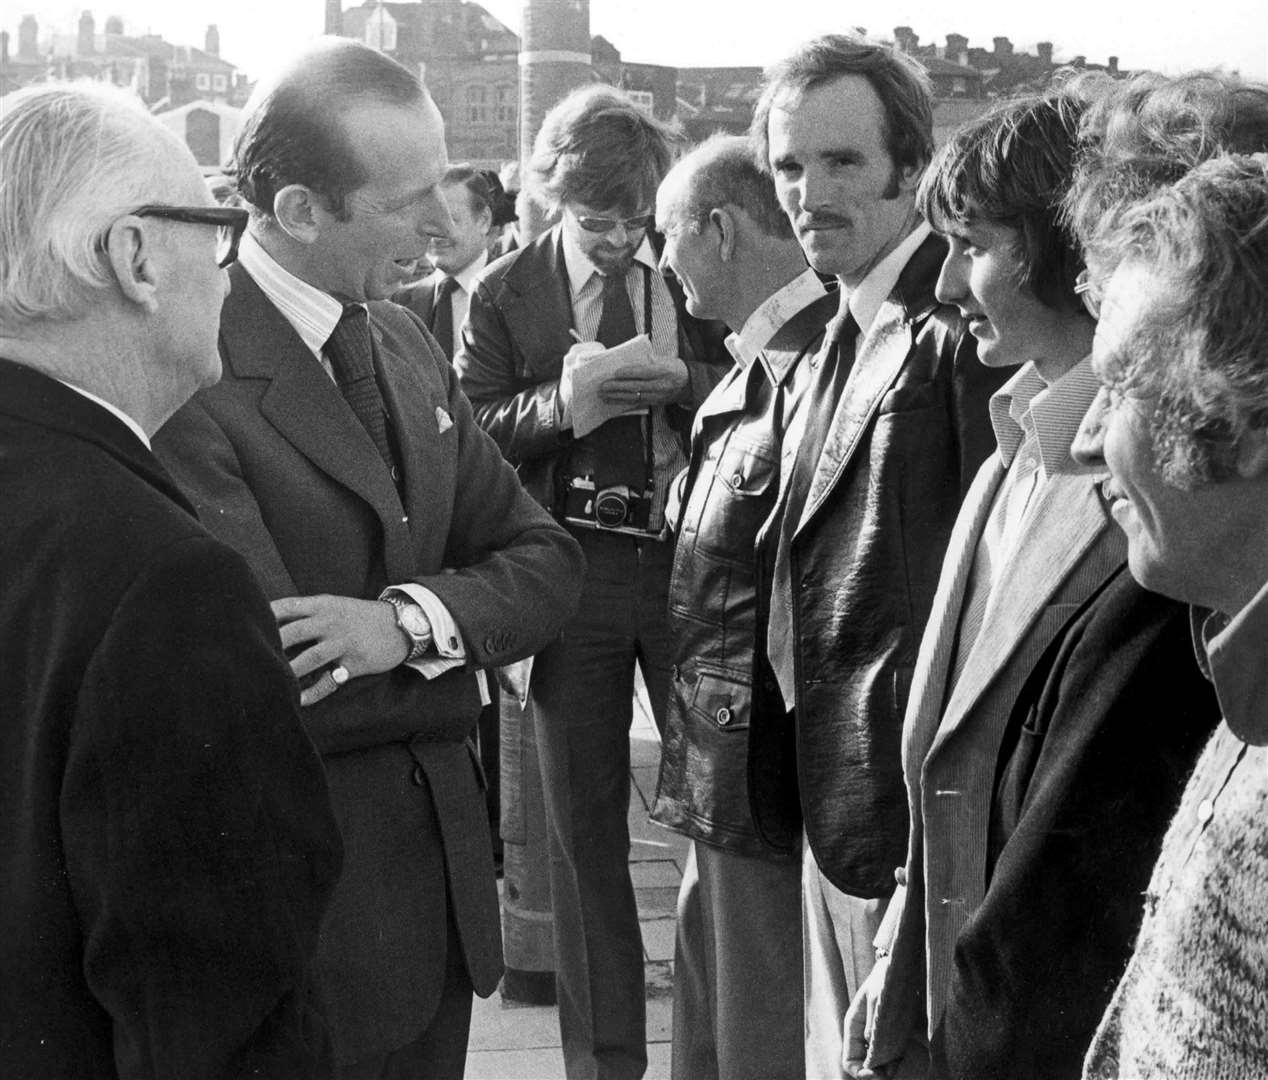 The Duke of Kent opening Maidstone Bridge in 1978 and chatting to some of the workmen